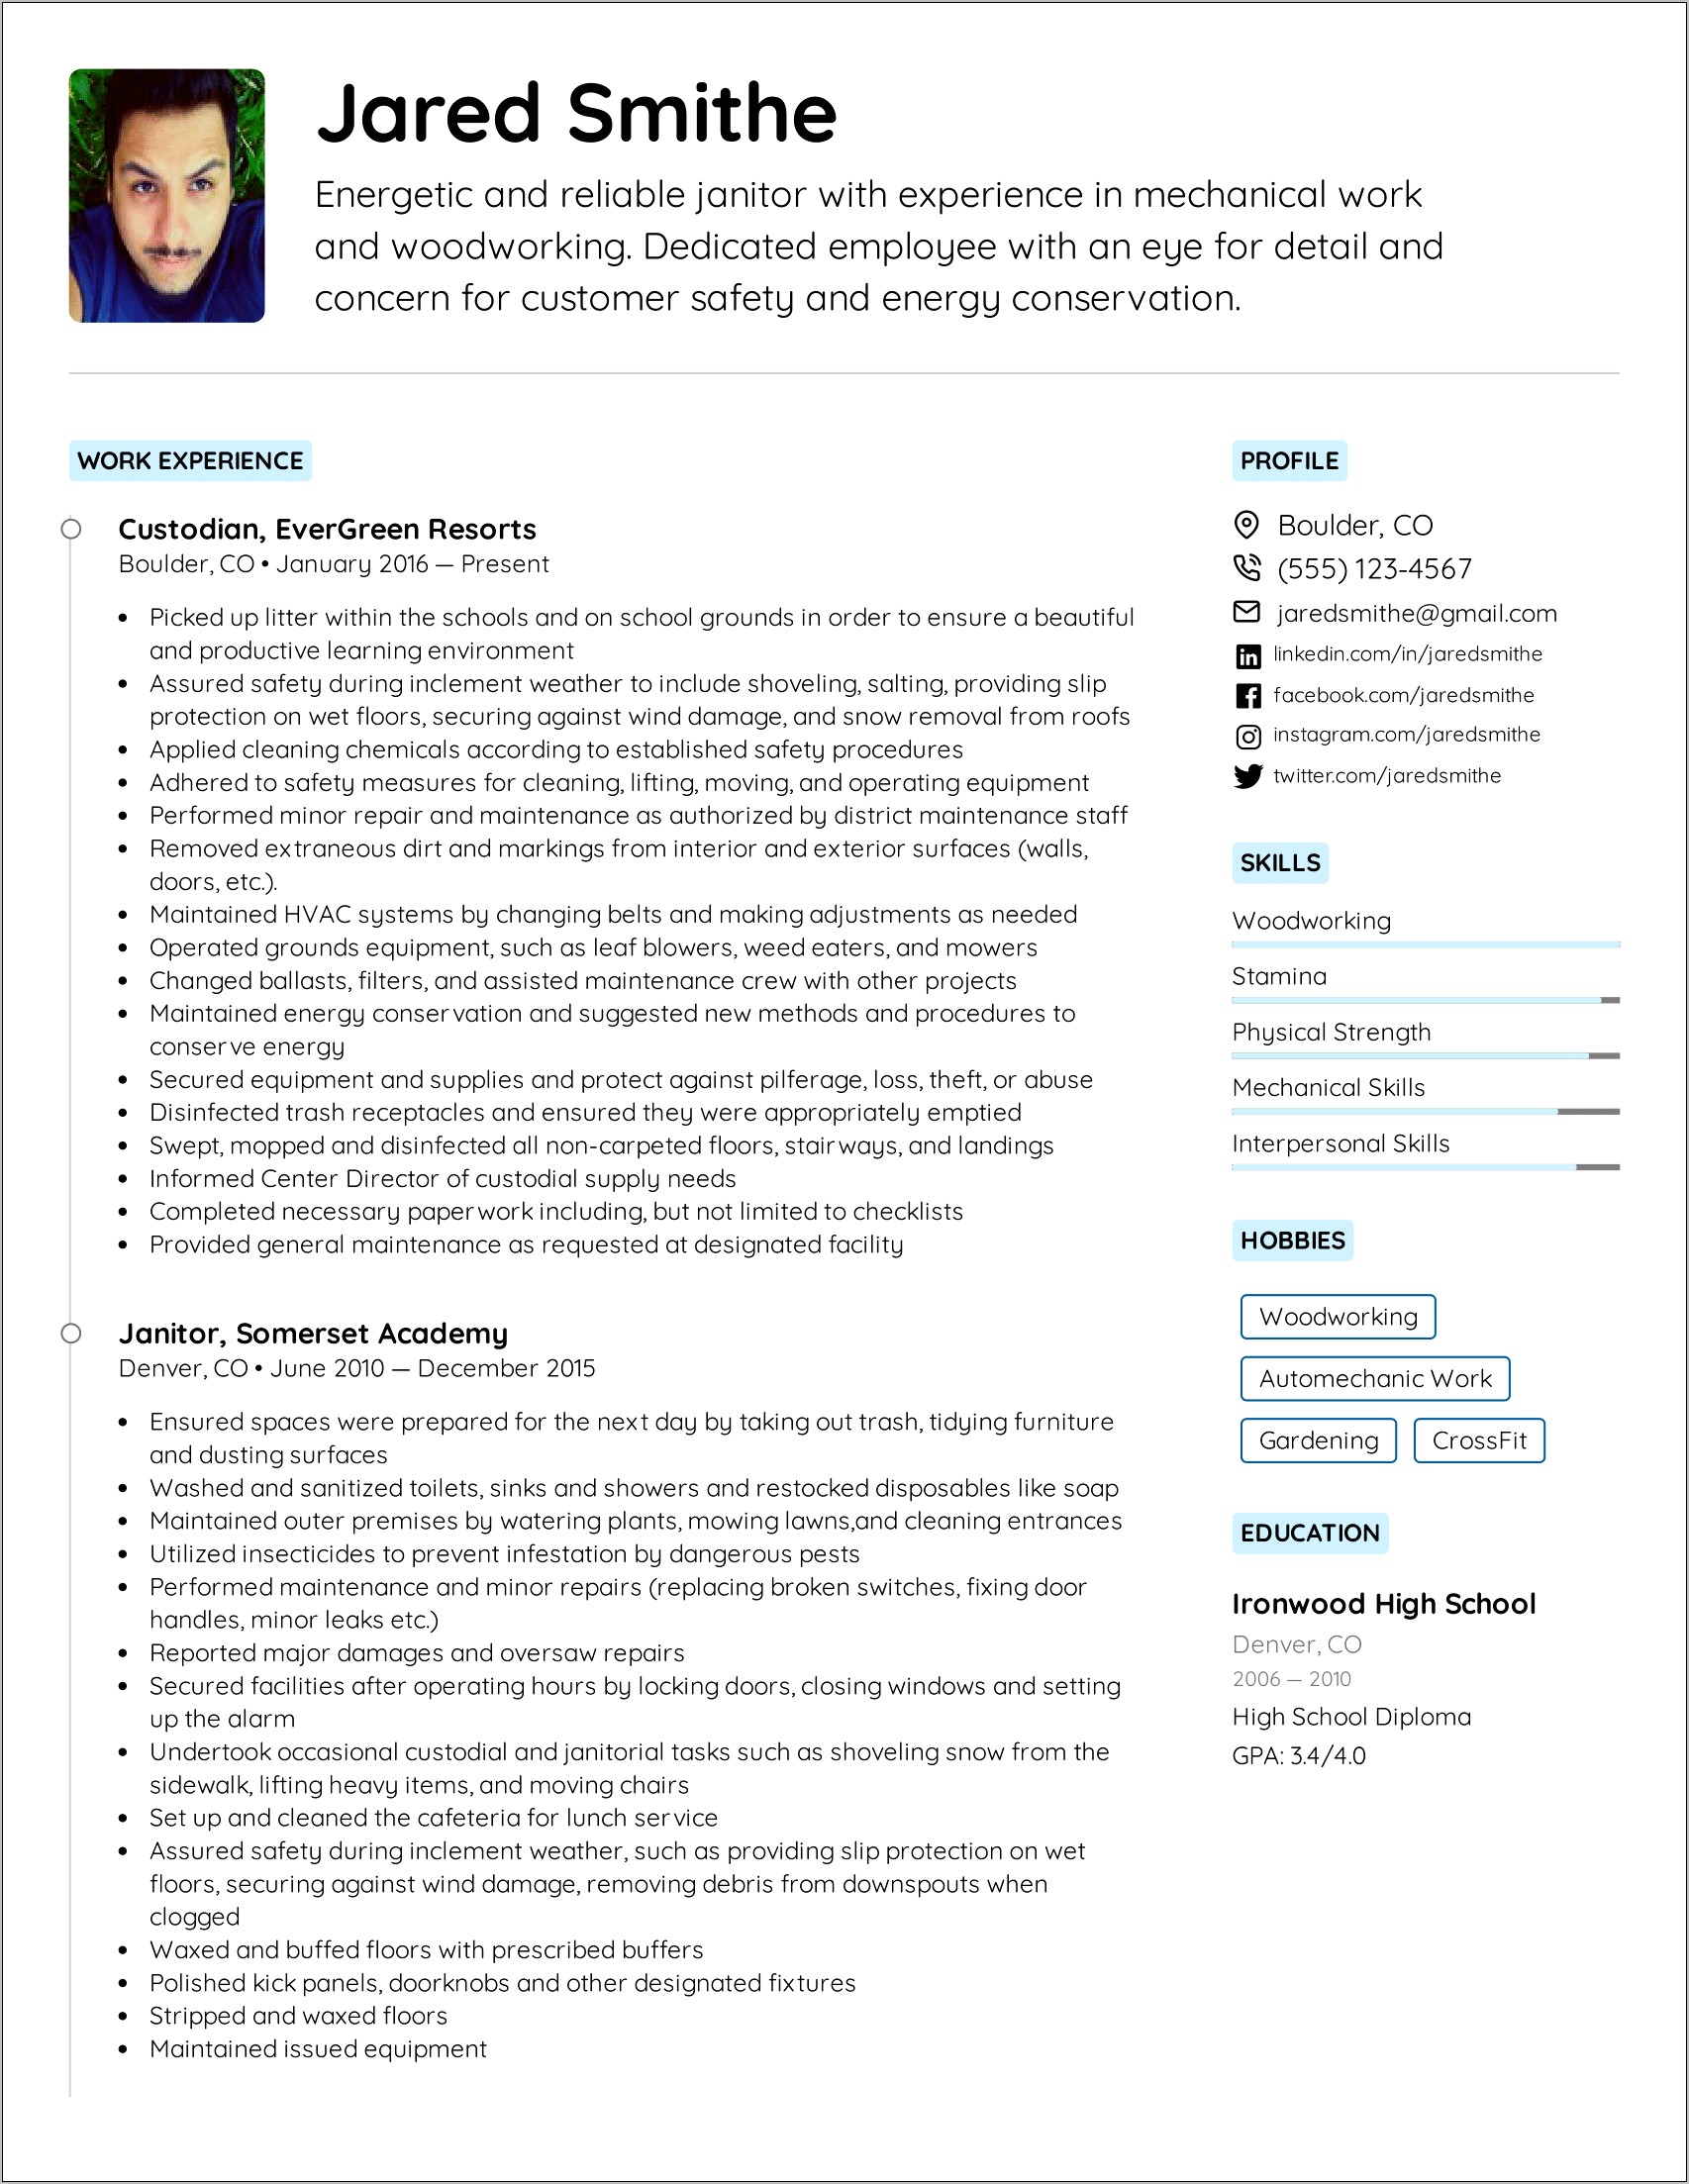 Sample Resume For Janitorial Worker